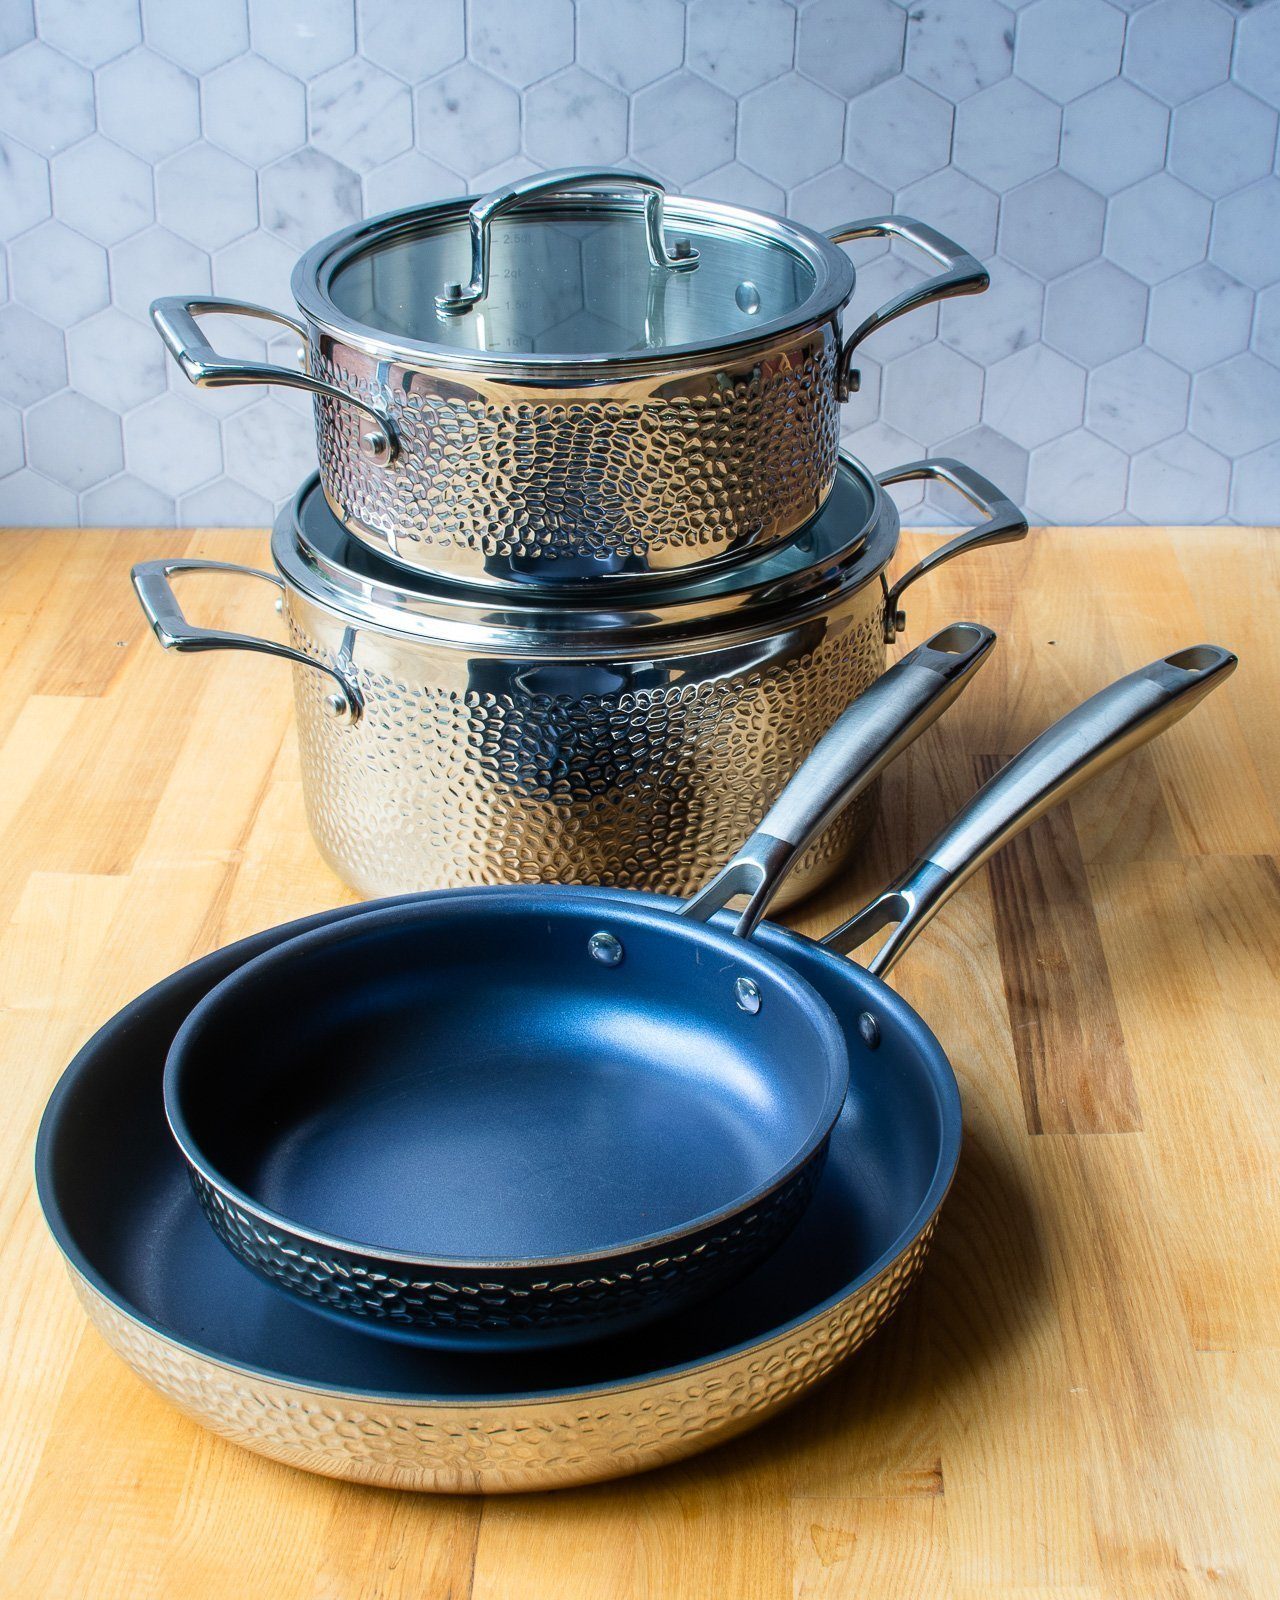 Blue Jean Chef® 6-piece Hammered Clad Cookware Set